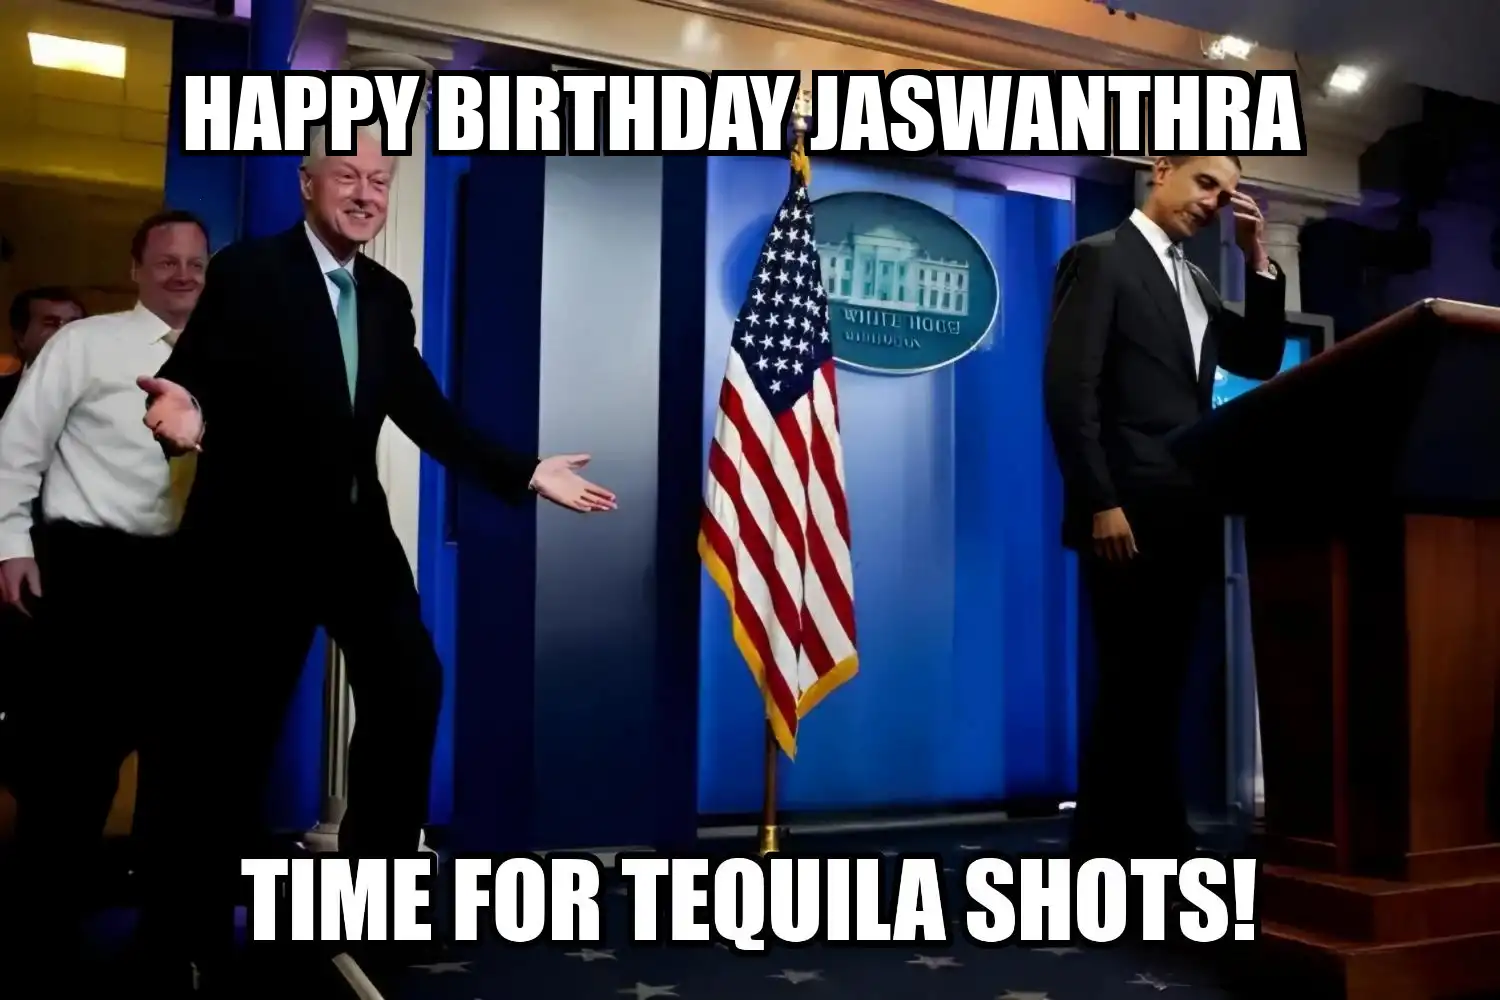 Happy Birthday Jaswanthra Time For Tequila Shots Memes